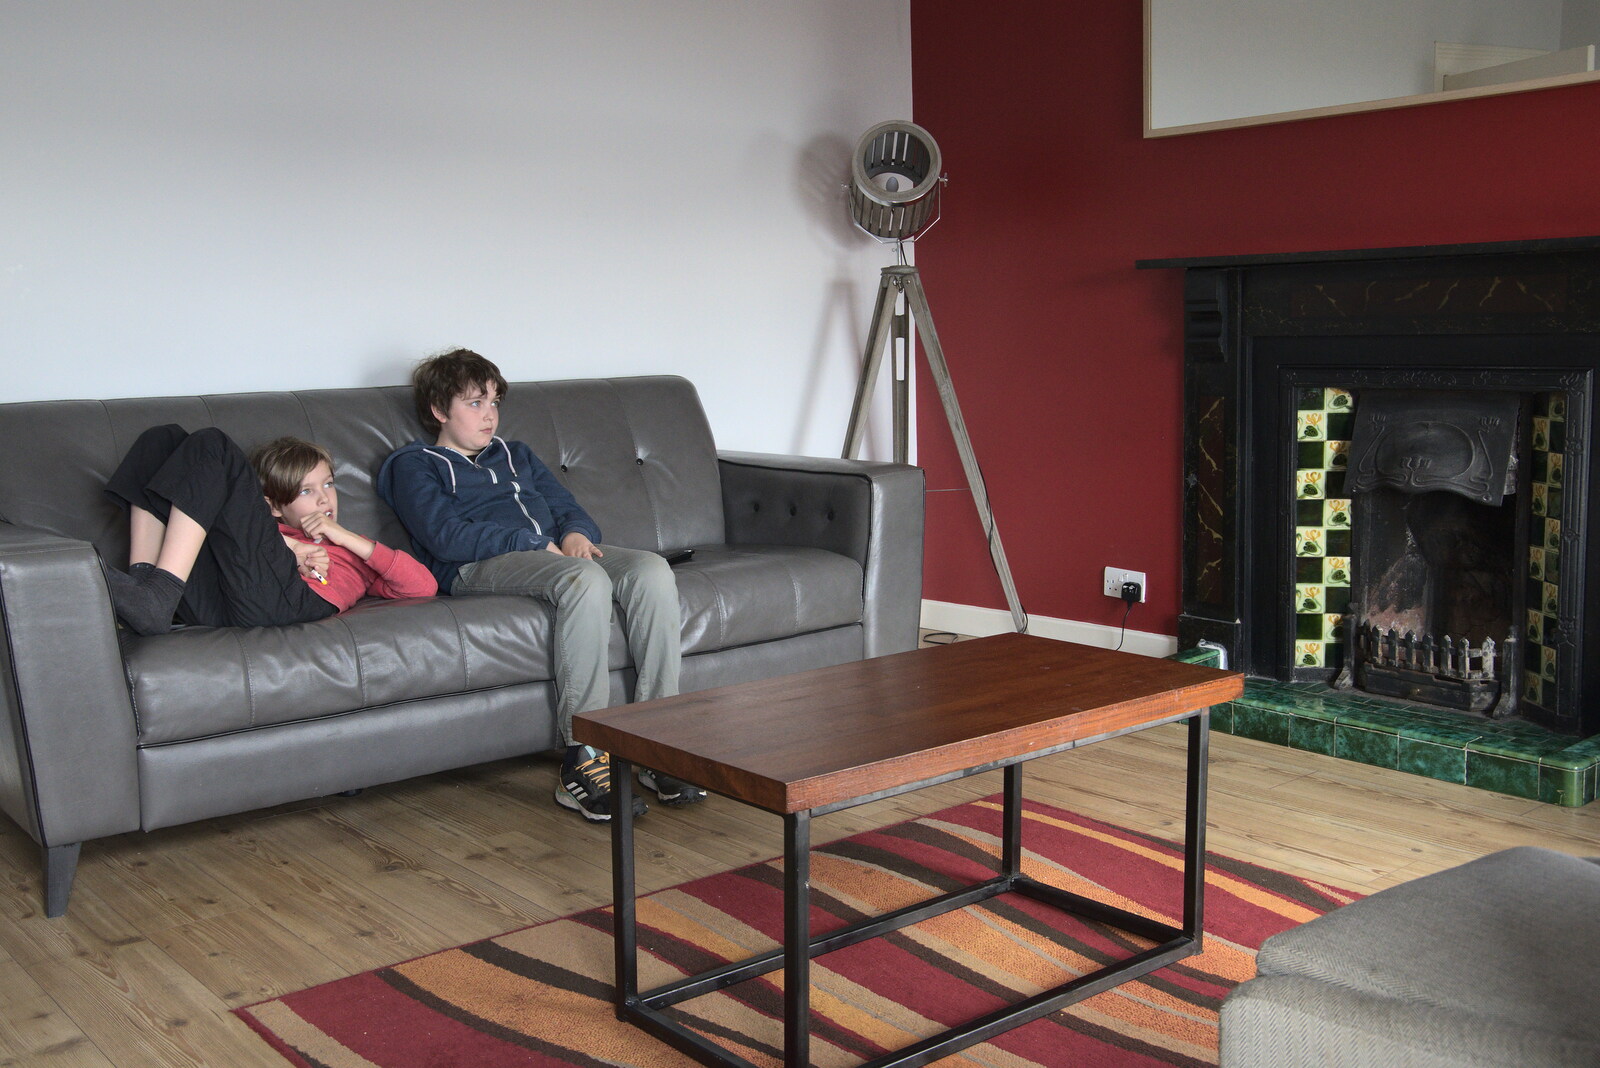 Greencastle, Doagh and Malin Head, County Donegal, Ireland - 19th April 2022: The boys watch some normal telly for a change